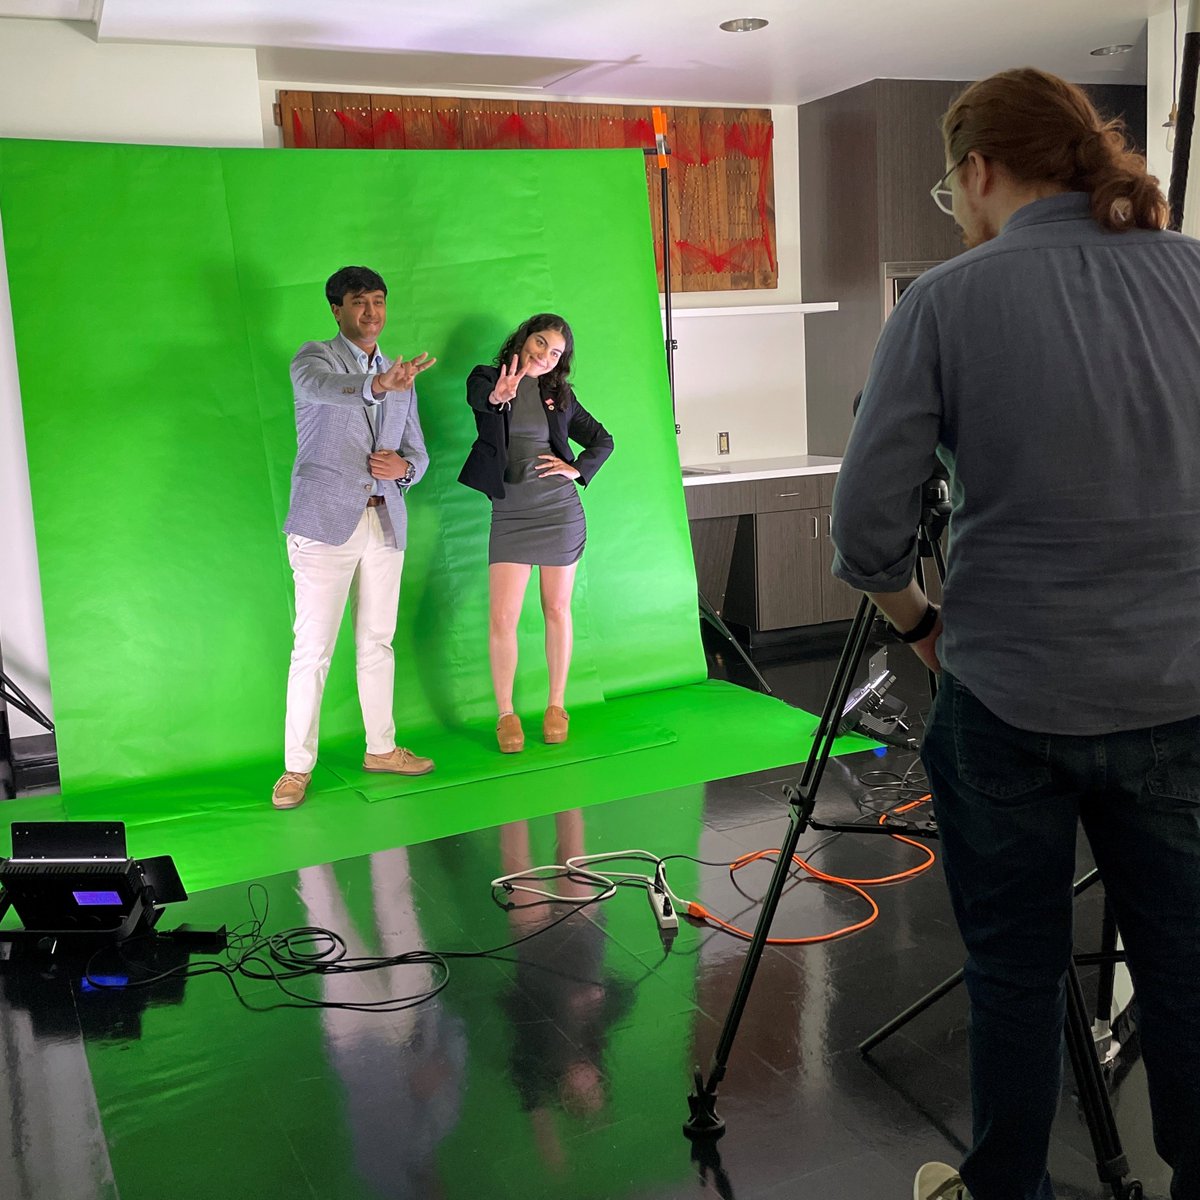 Some #BauerGrad24 content on the horizon? 👀 Here’s a quick behind-the-scenes look at our upcoming #UHBauer grad photo and video shoot: #FutureFocused!